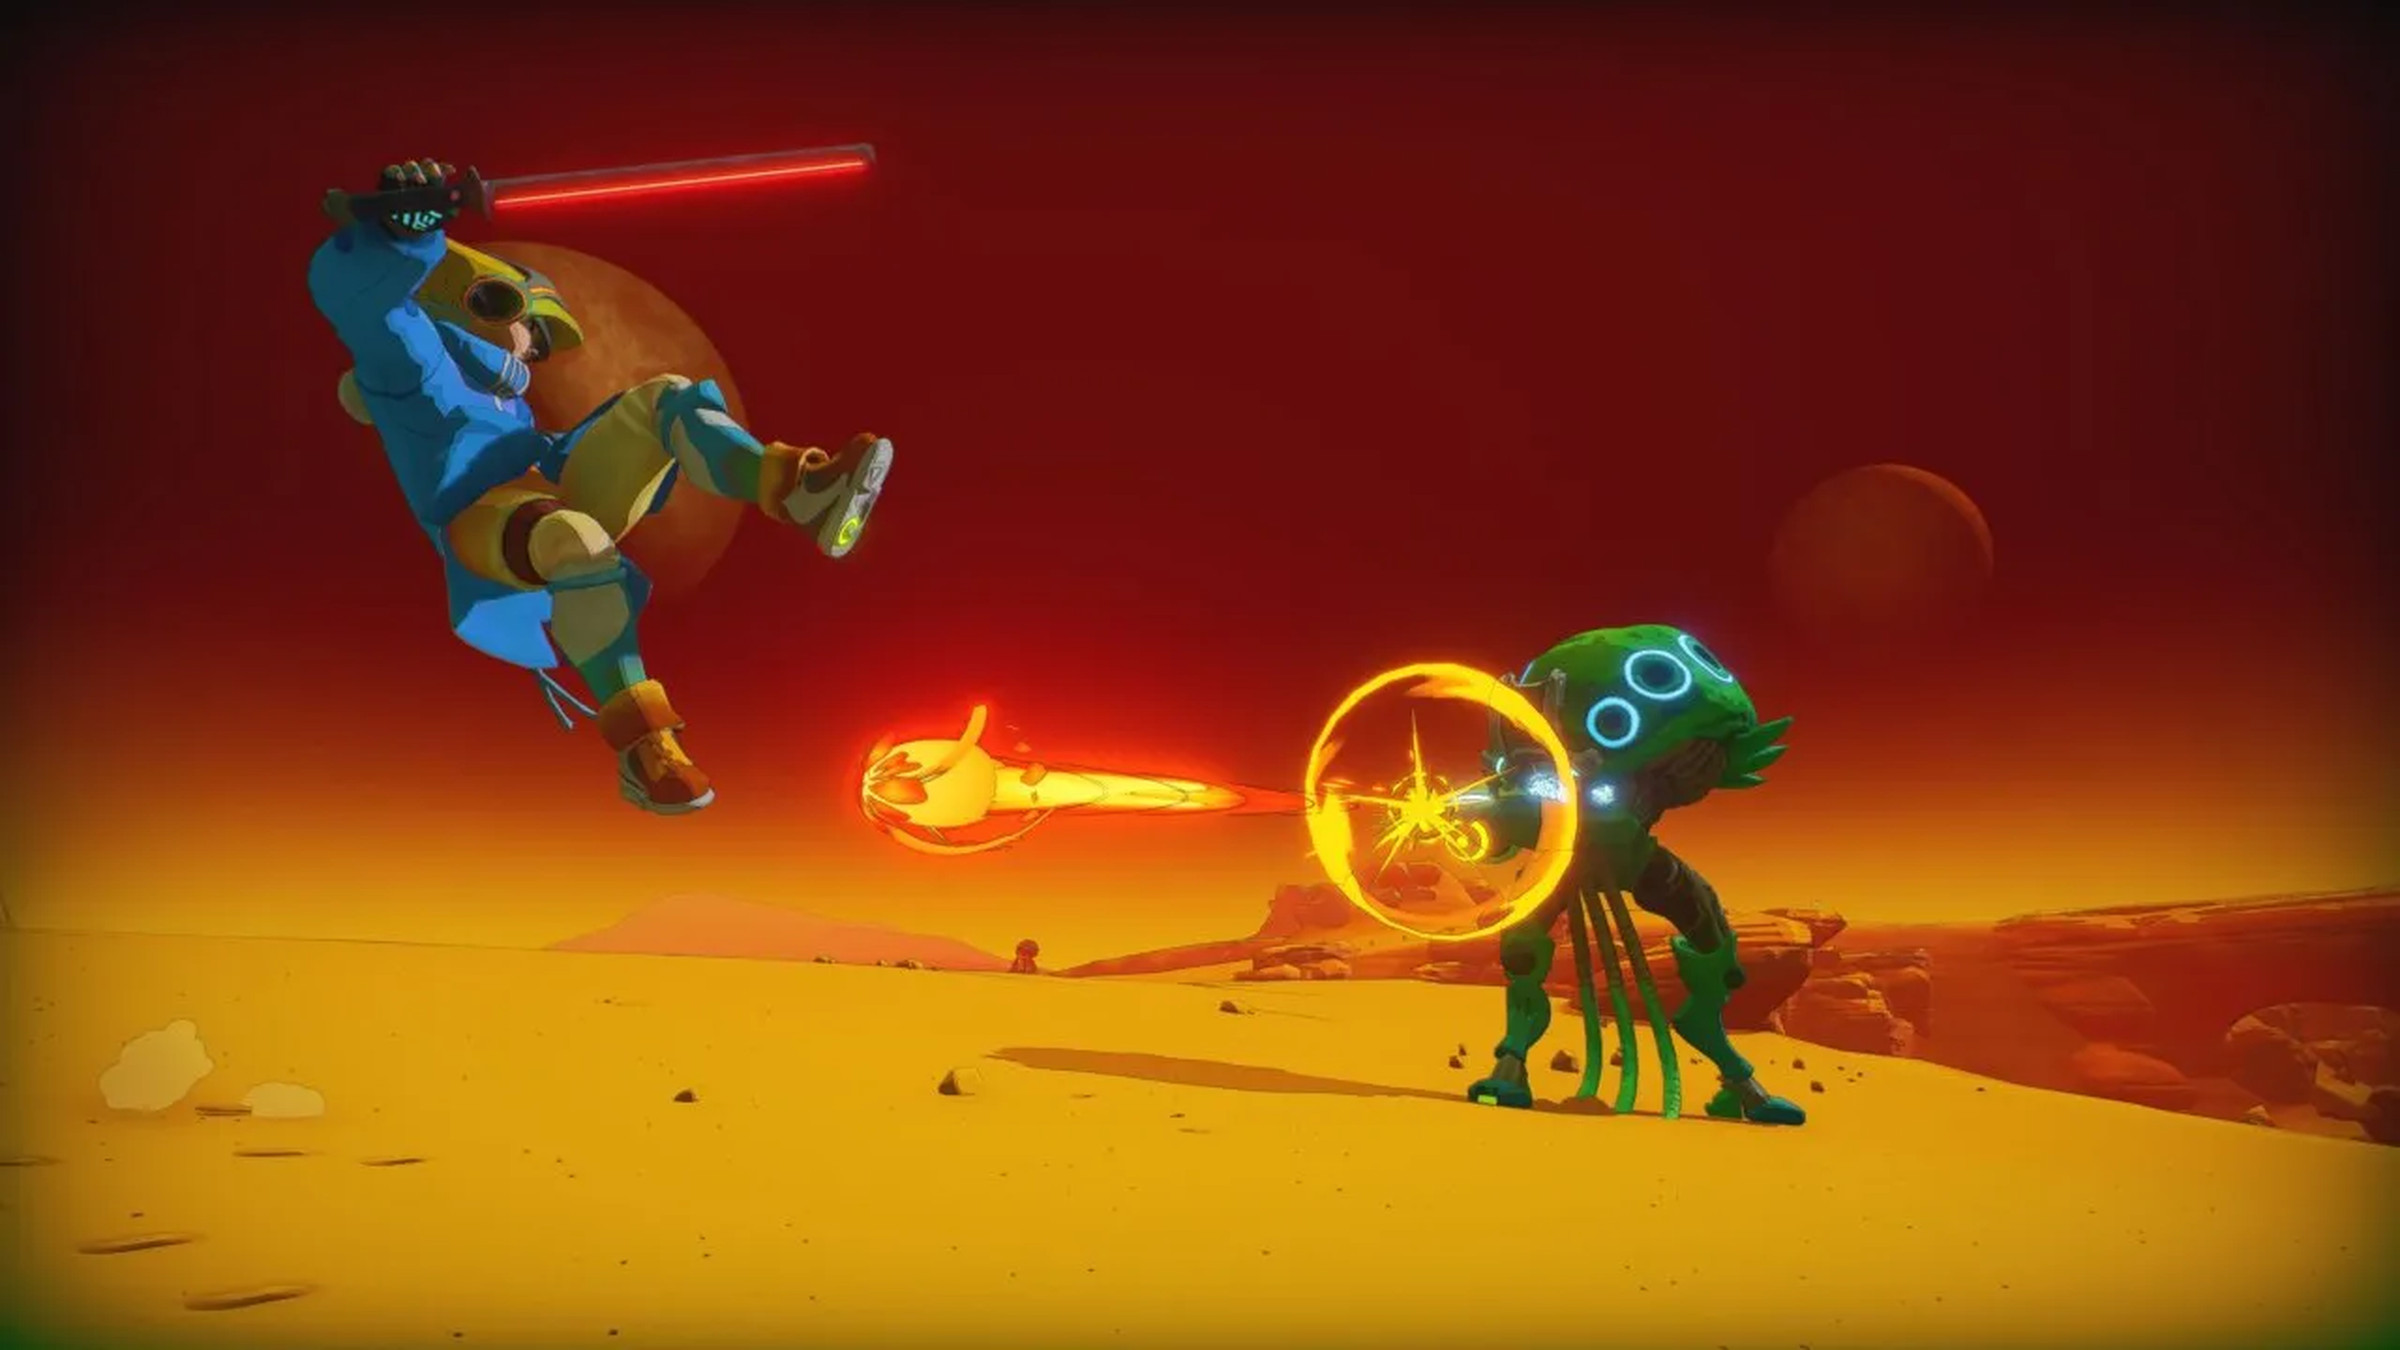 Screenshot of PixelJunk Raiders where a human player dodges a laser bolt fired by a jellyfish-like creature against a sandy landscape